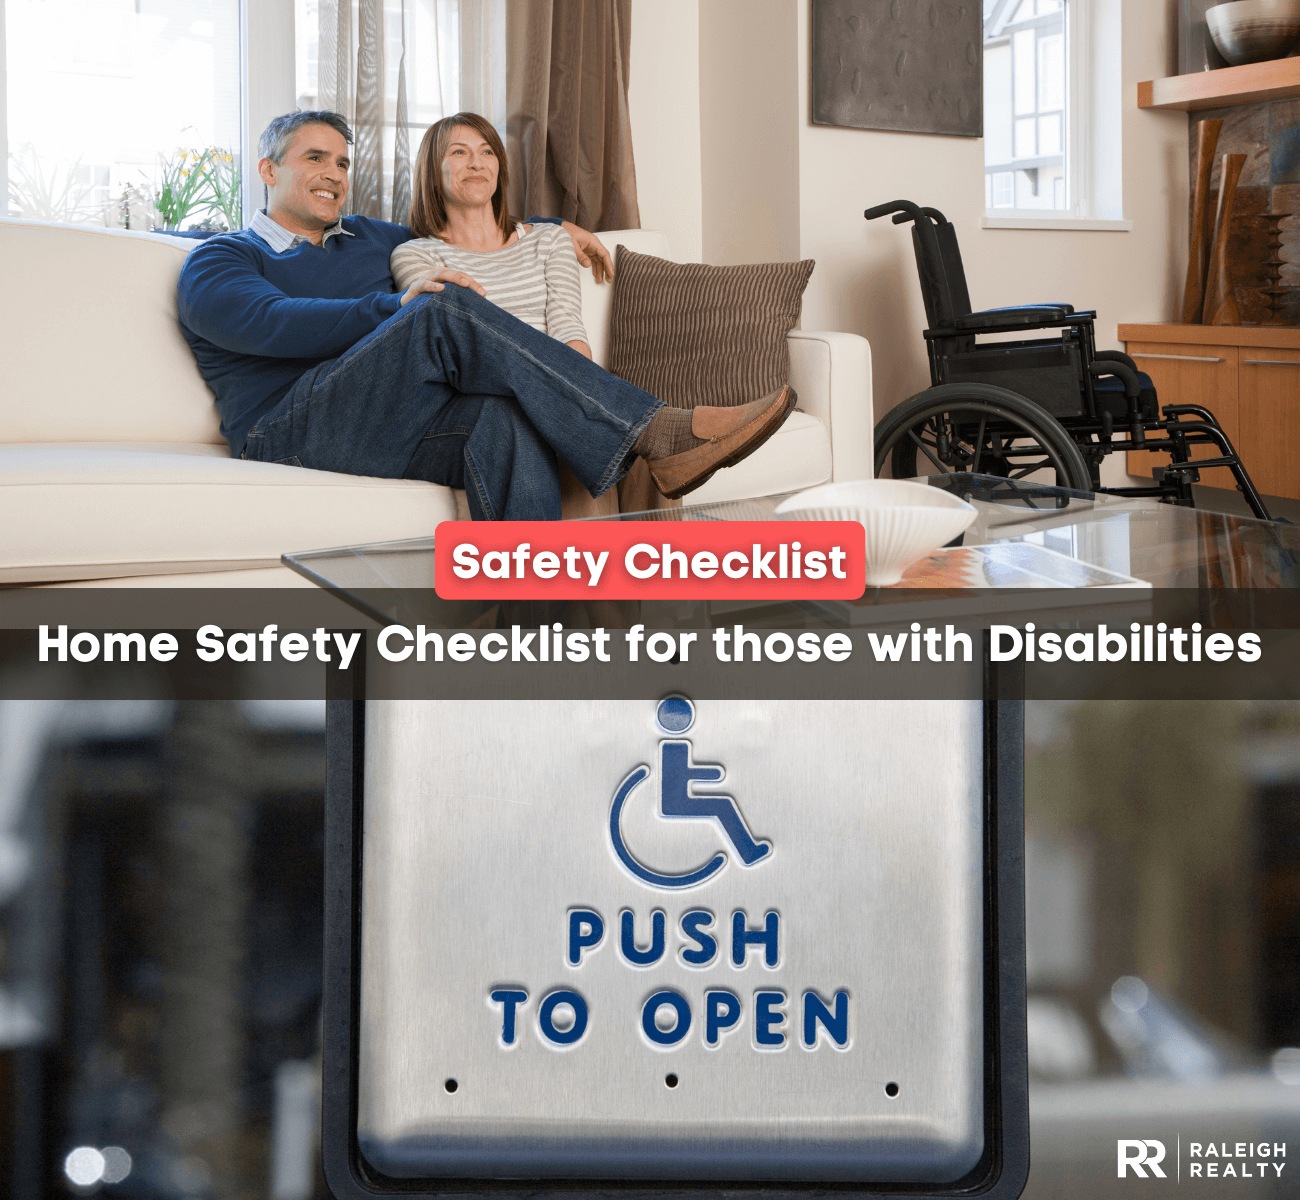 Home Safety Tips for Those With Disabilities